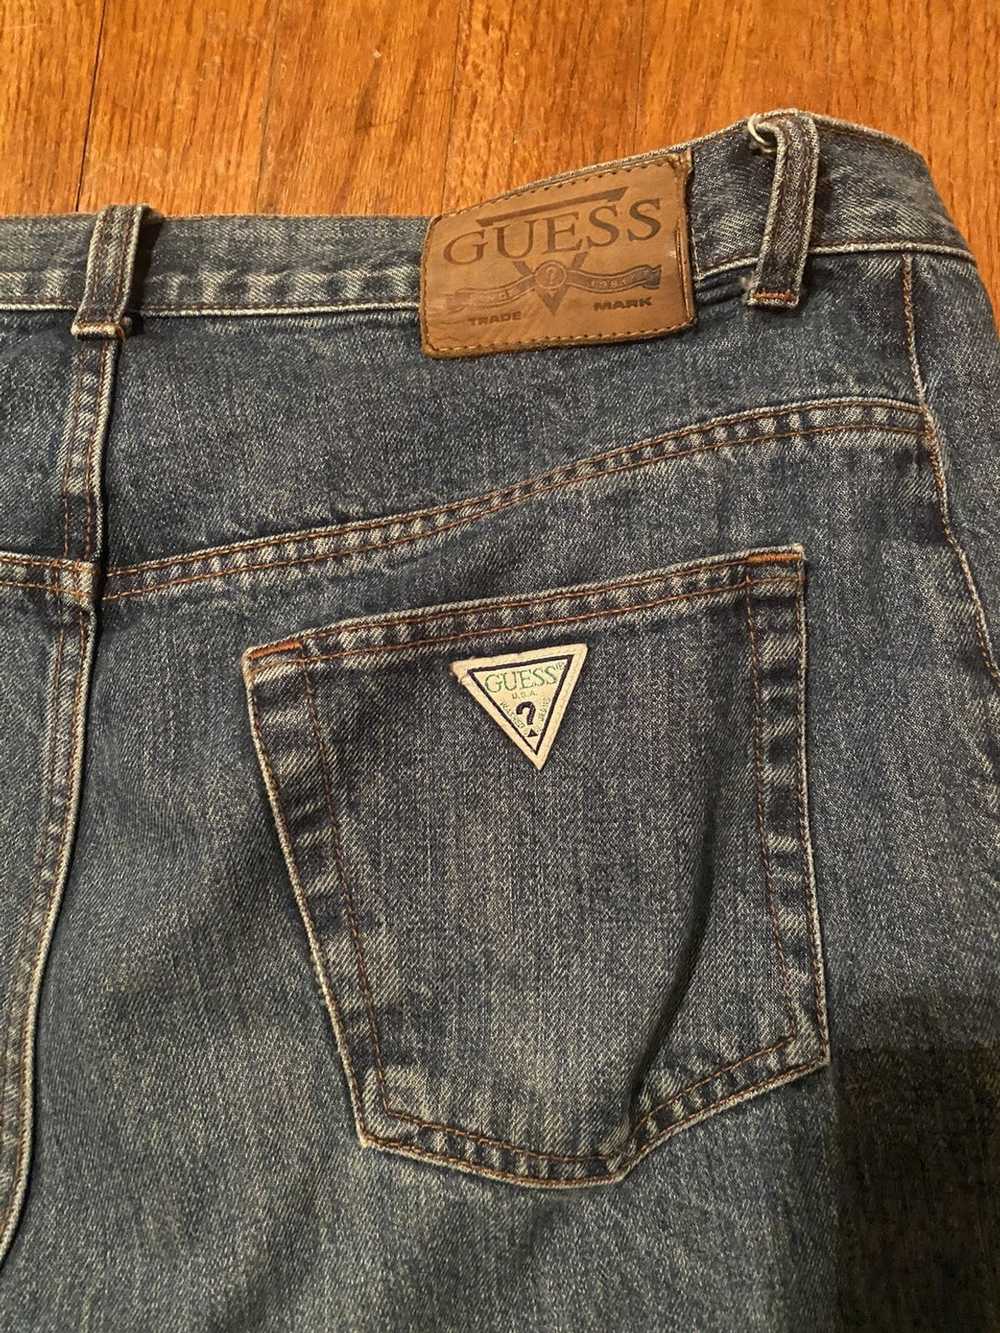 Guess Vintage Guess Pascal Jeans - image 2